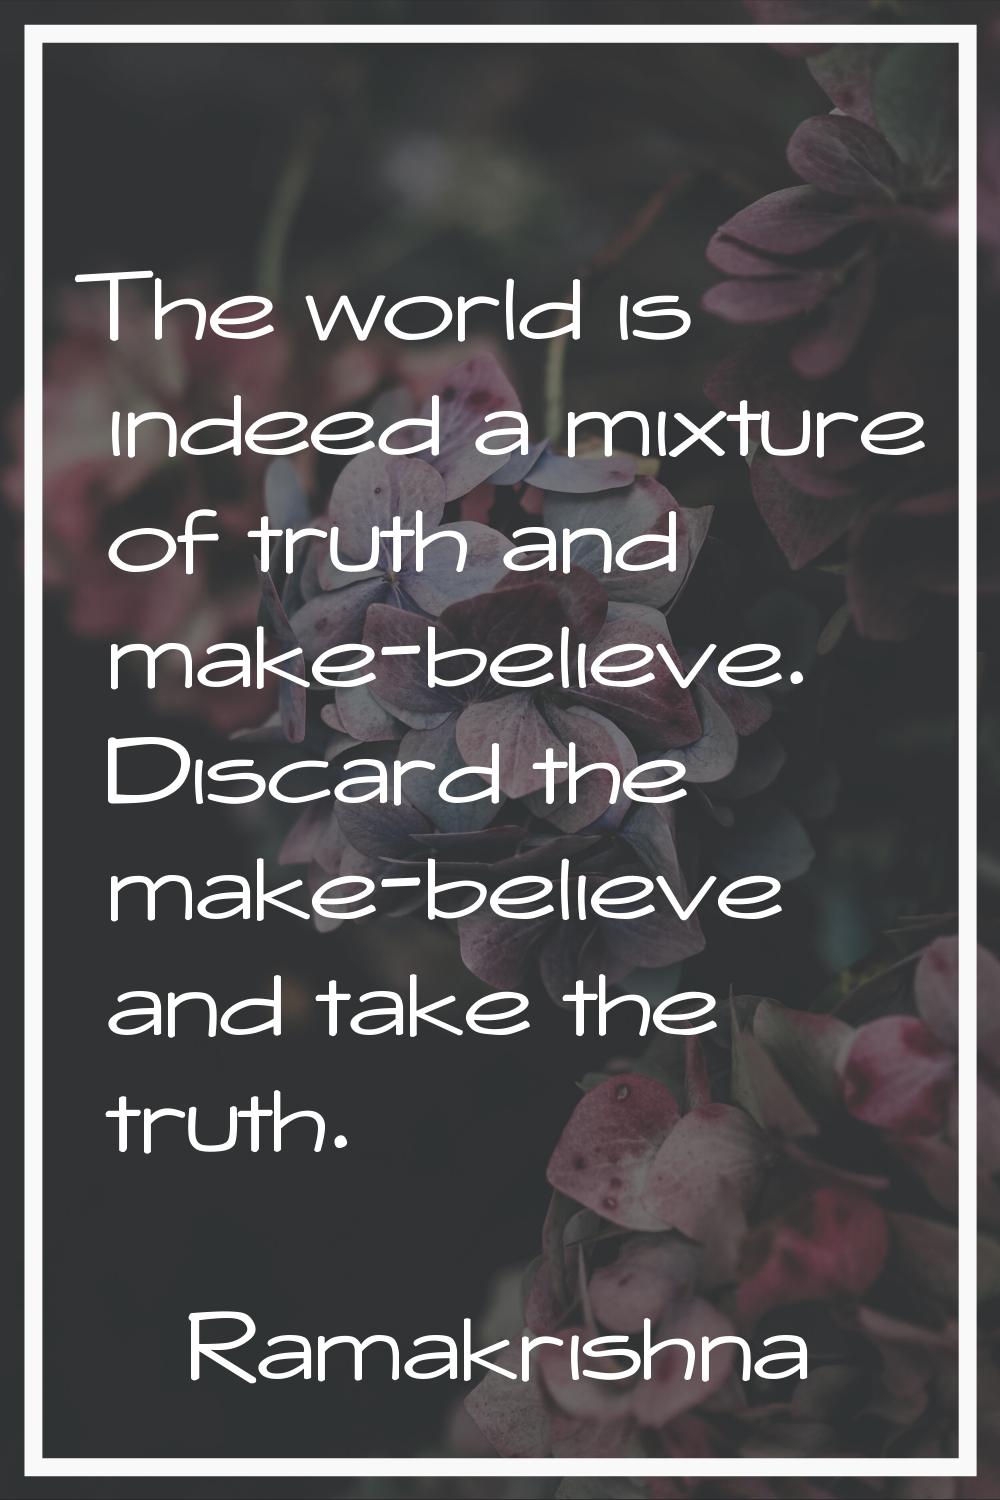 The world is indeed a mixture of truth and make-believe. Discard the make-believe and take the trut